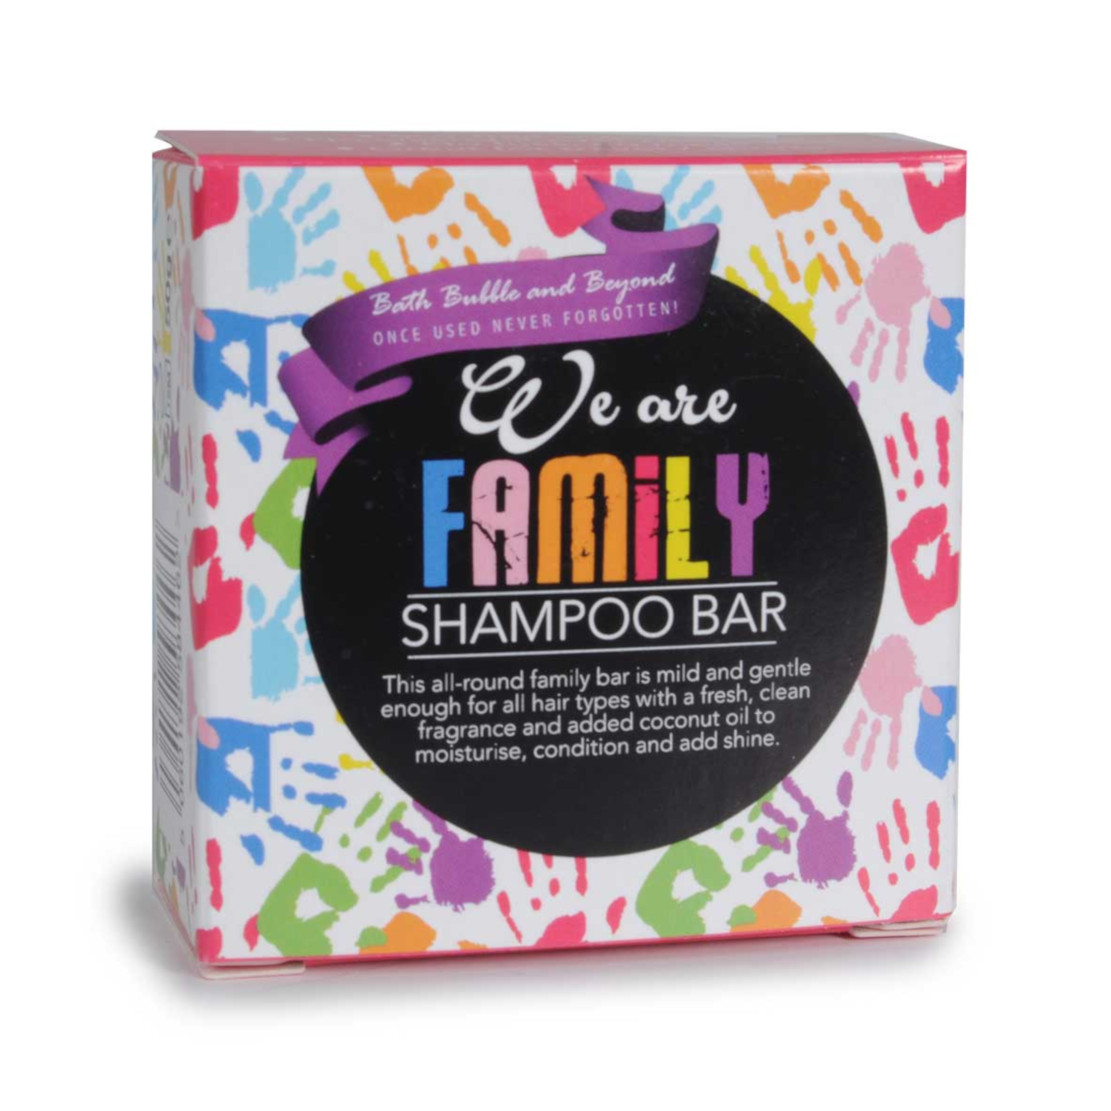 Bath Bubble and Beyond We are family Shampoo Bar